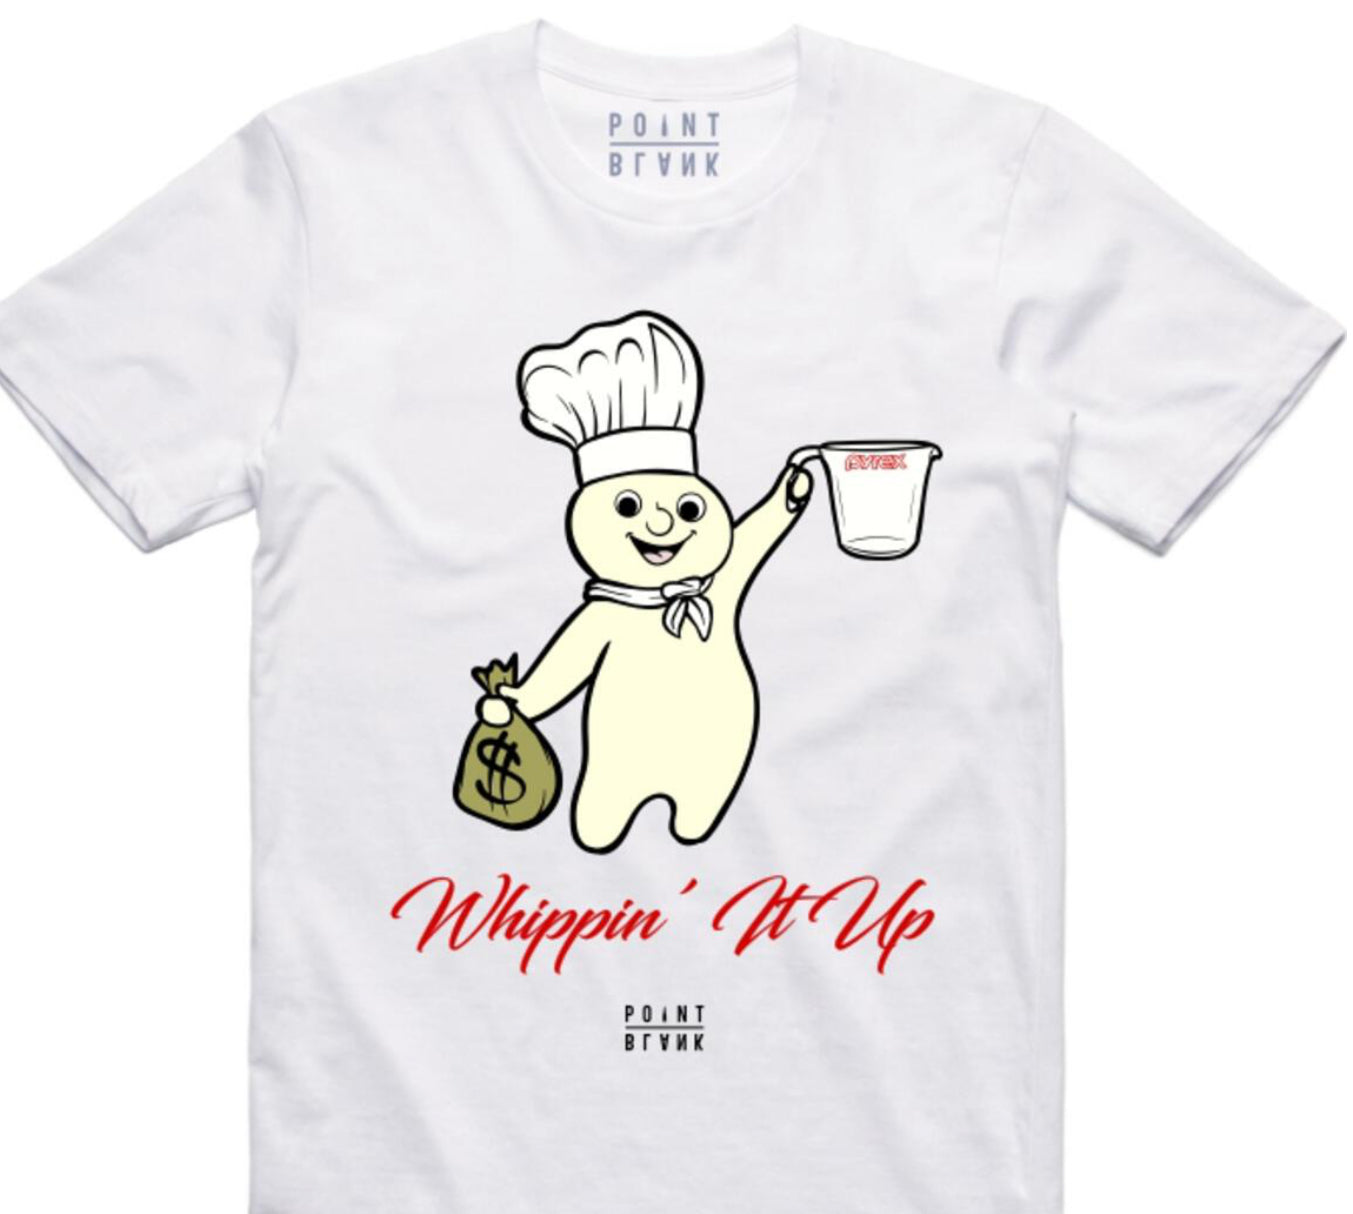 WHIPPIN’ IT UP TEE